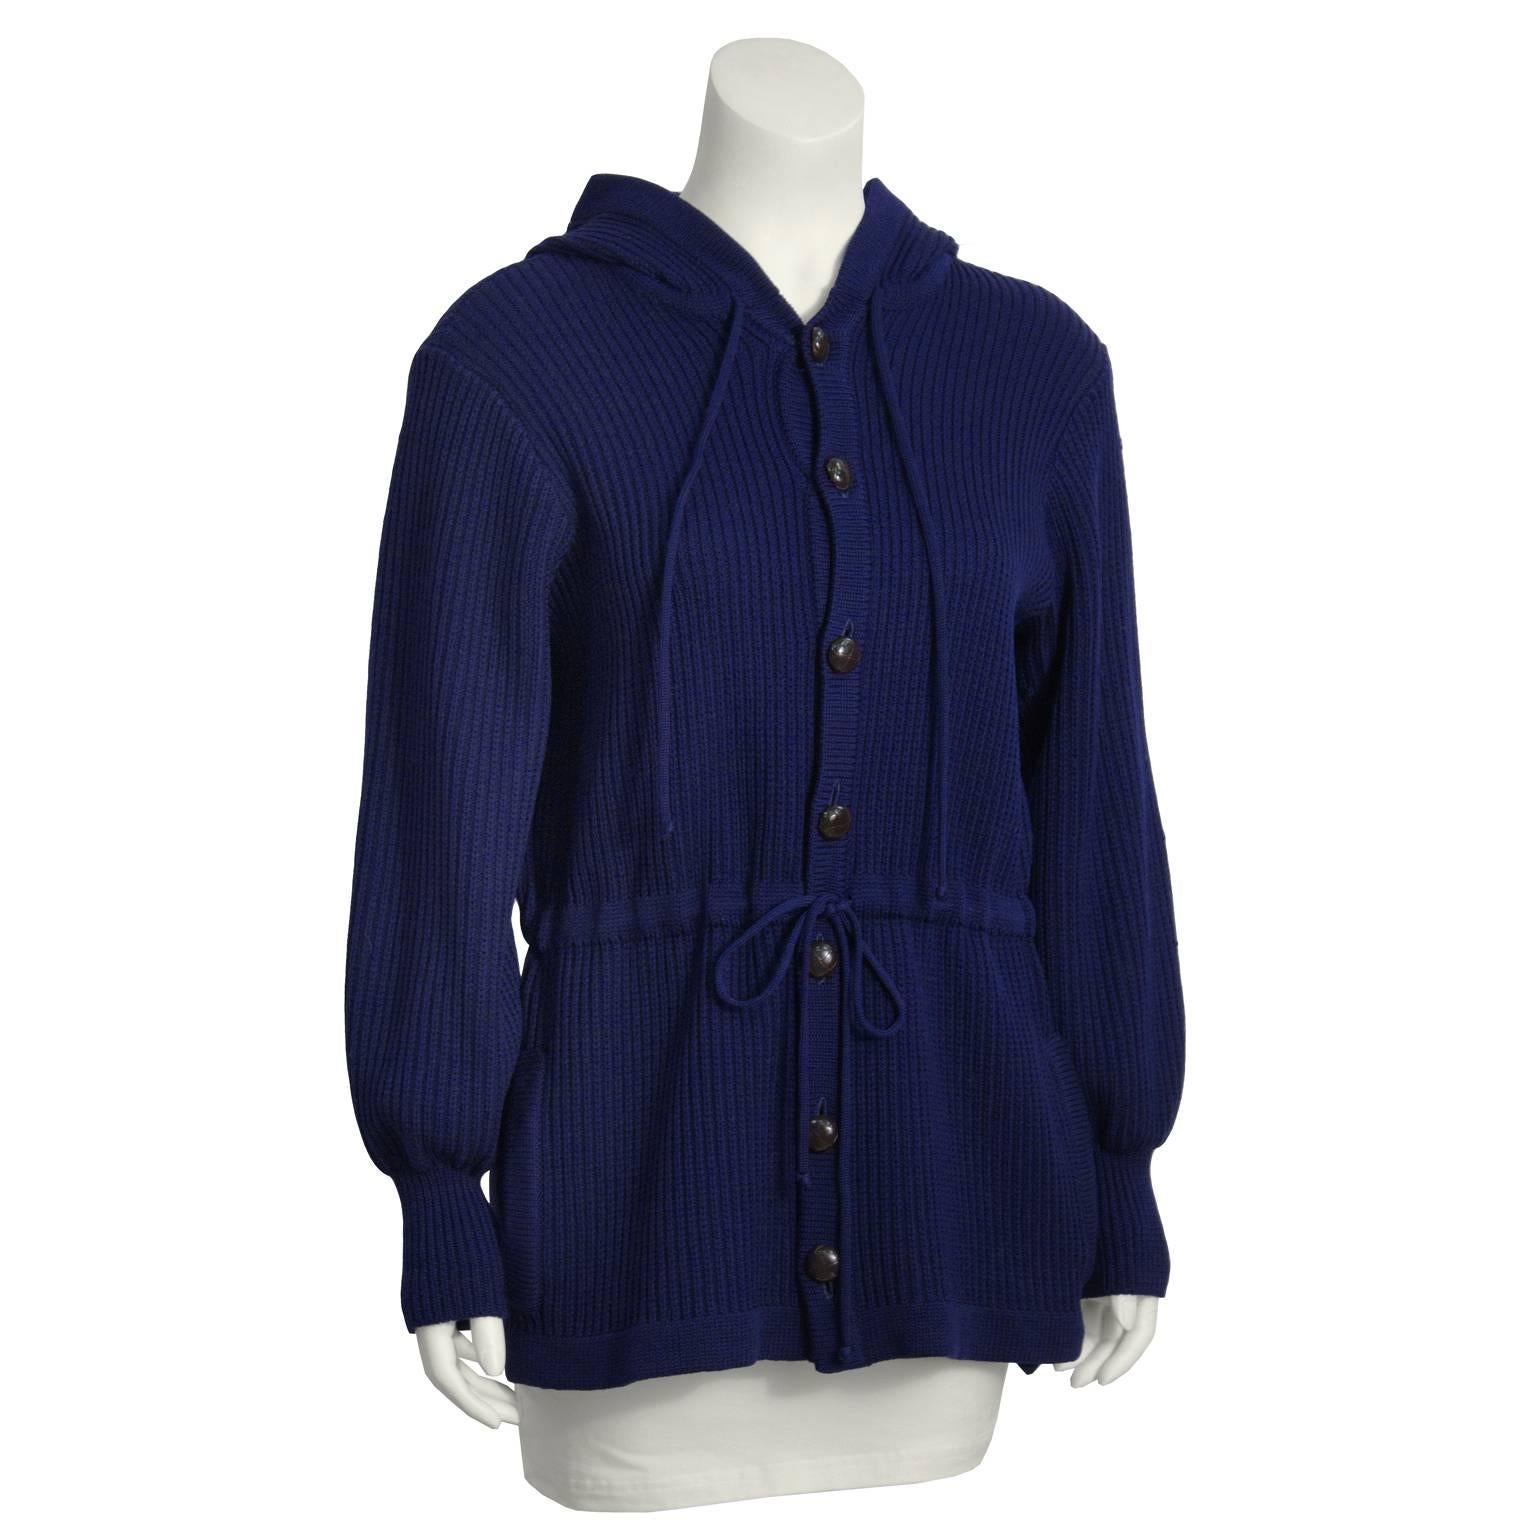 Stay cozy and chic with this Yves Saint Laurent navy hooded knit cardigan from the 1970s. Features drawstring at neck and waist. Two slit pockets at the hips. Front button closure. Brown buttons have woven motif. Sleeves are loose fitting with